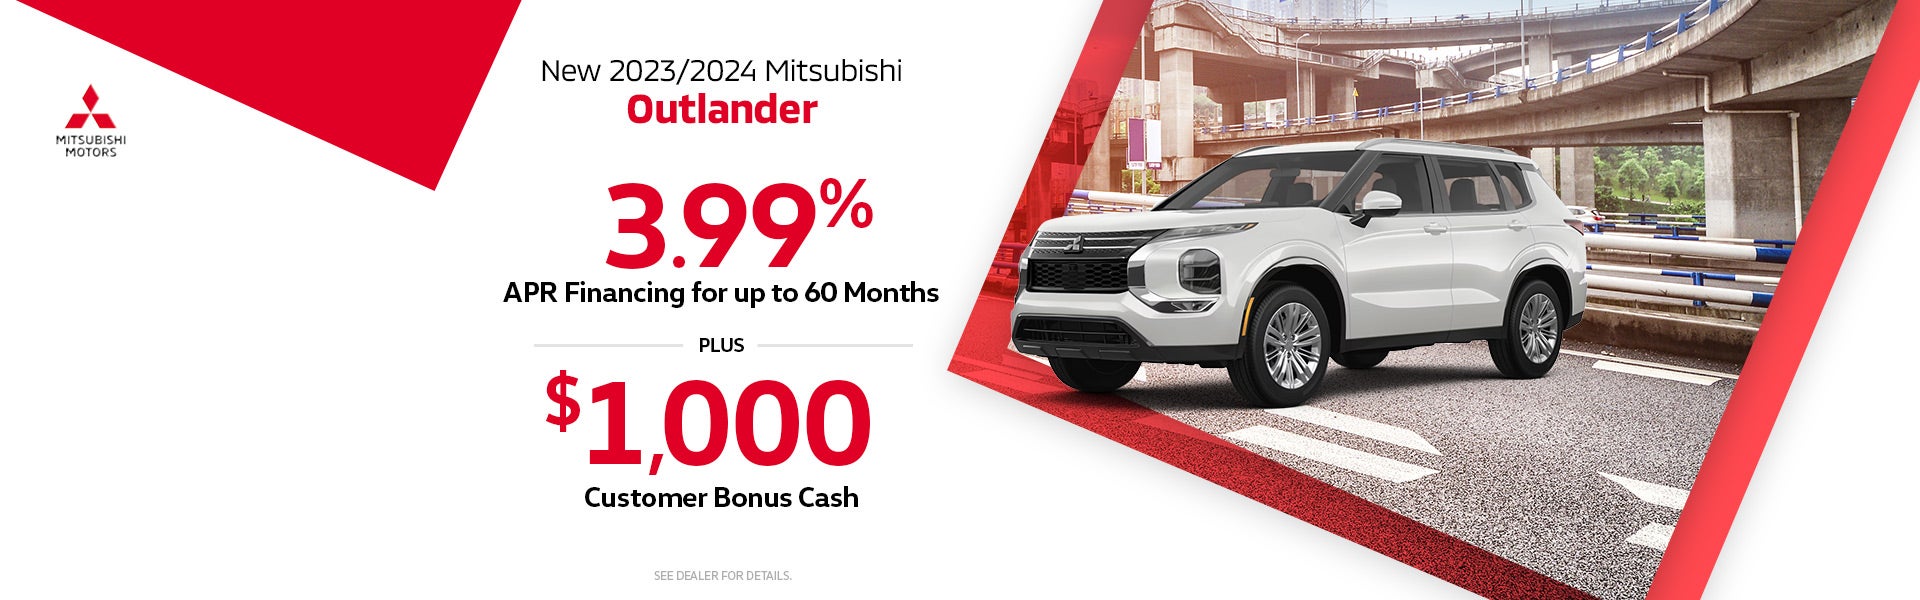 2023/2024 Outlander 3.99% APR up to 60 Months 